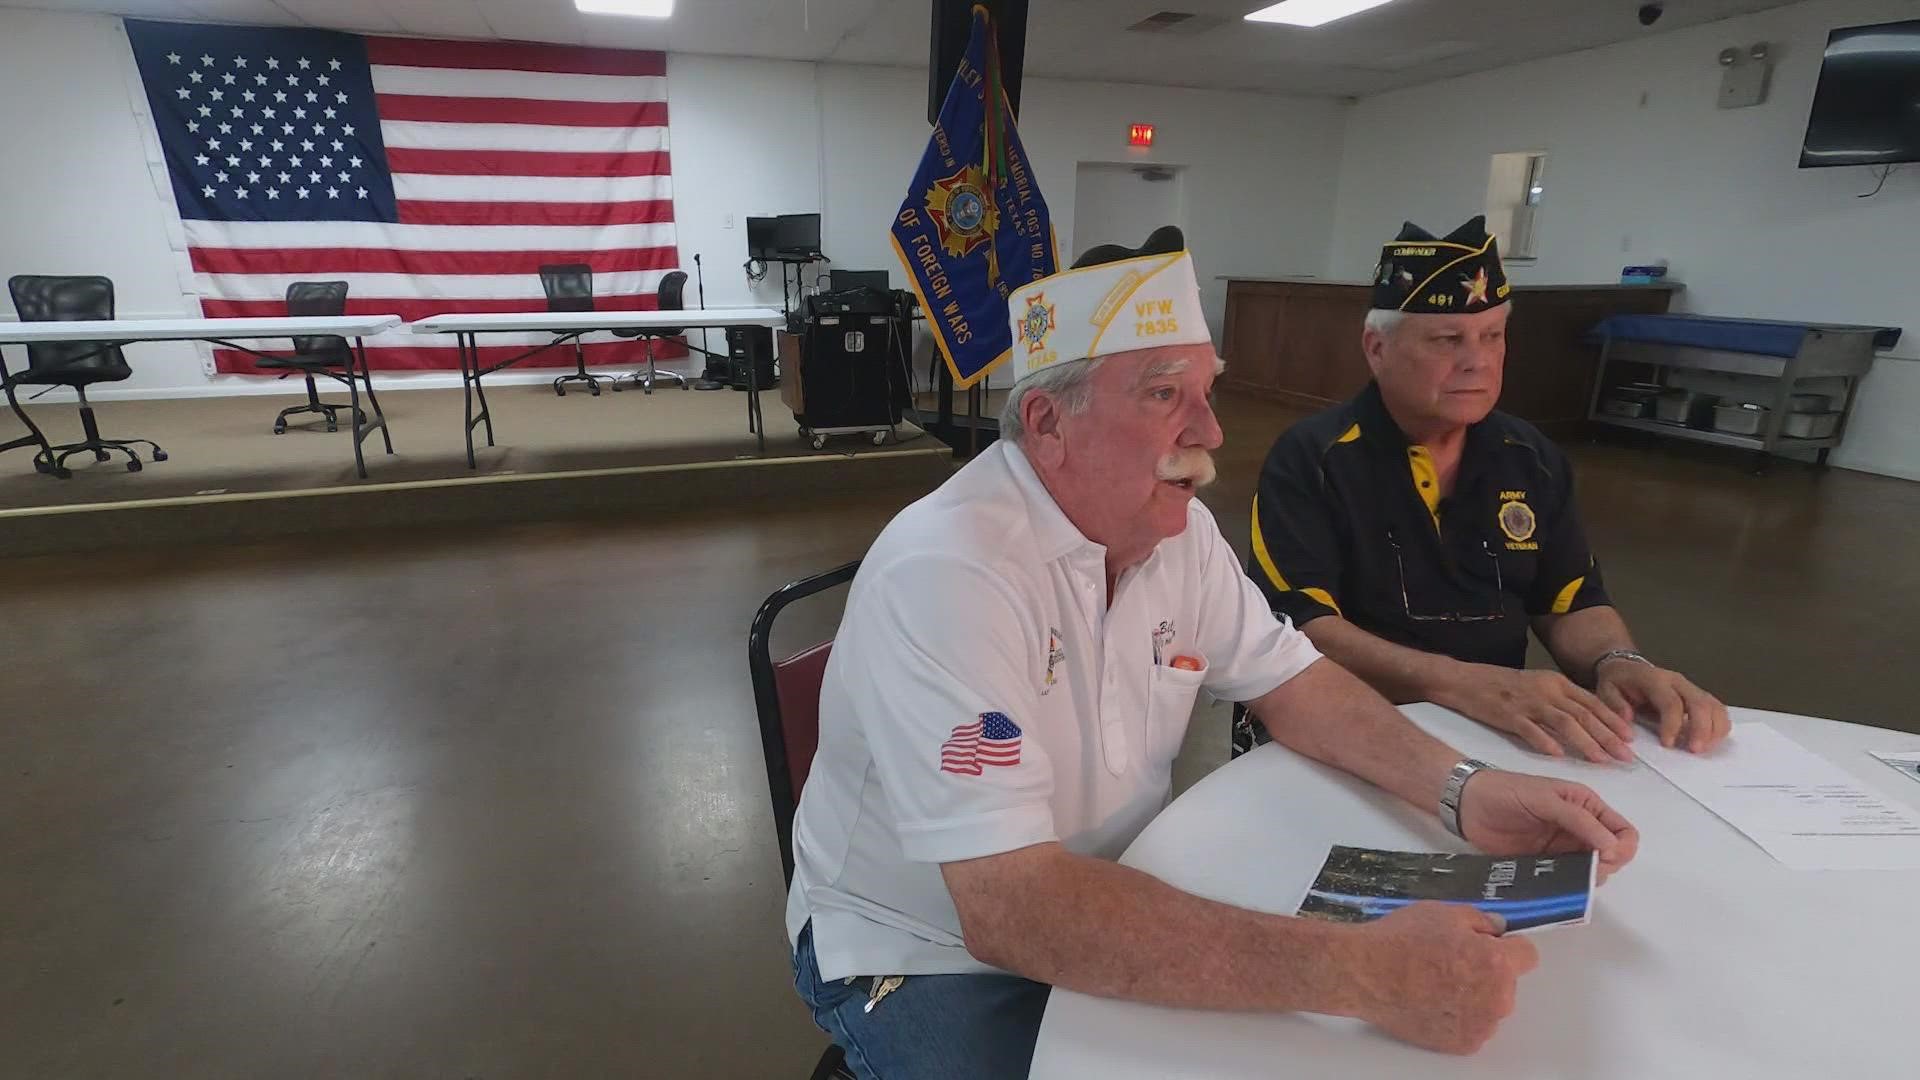 "They do super work protecting us and making sure we're safe. And we just want to honor them for their service," said Ricky Johnson, American Legion Post.